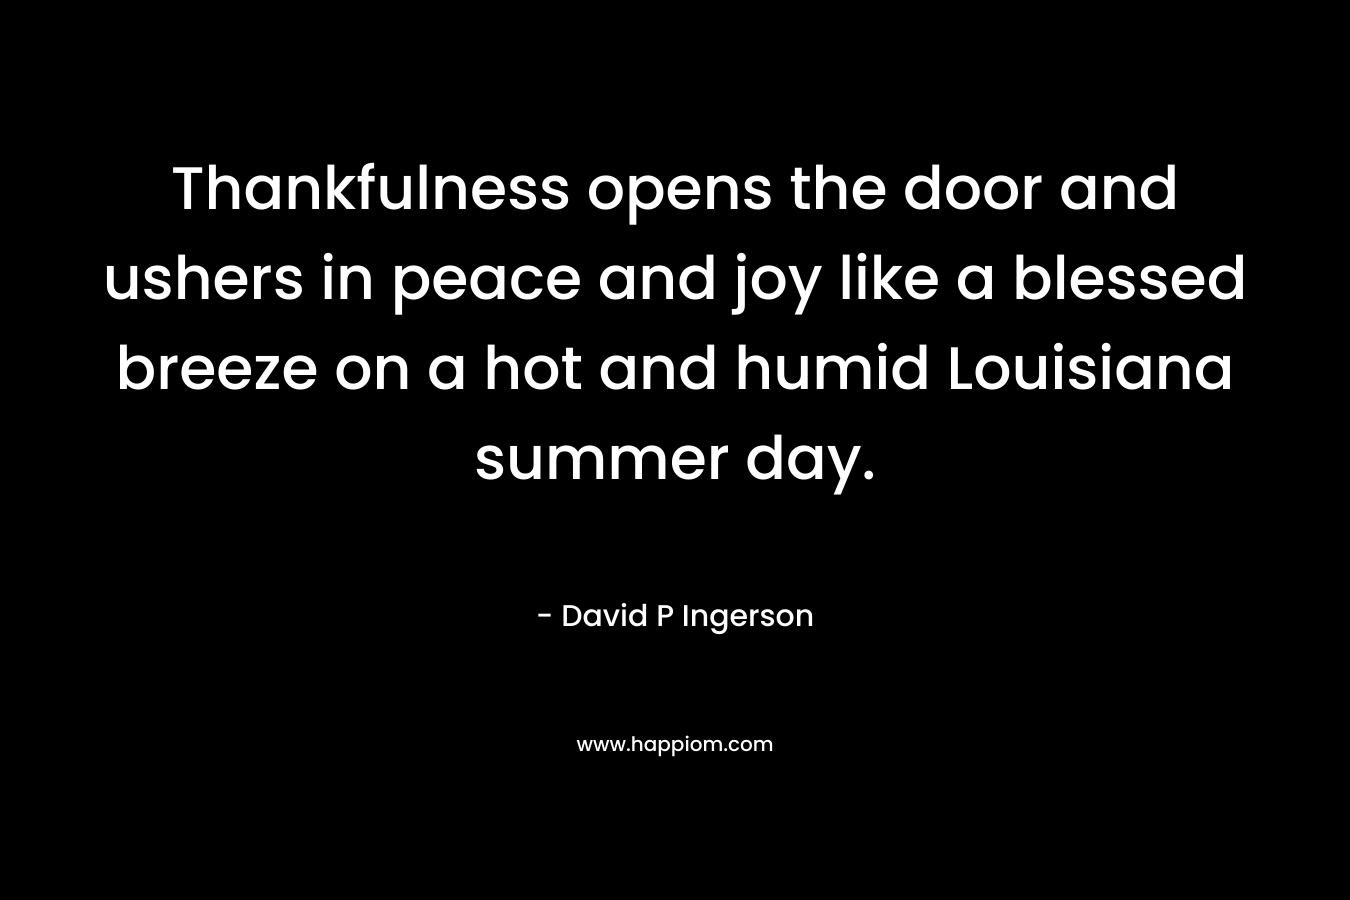 Thankfulness opens the door and ushers in peace and joy like a blessed breeze on a hot and humid Louisiana summer day.